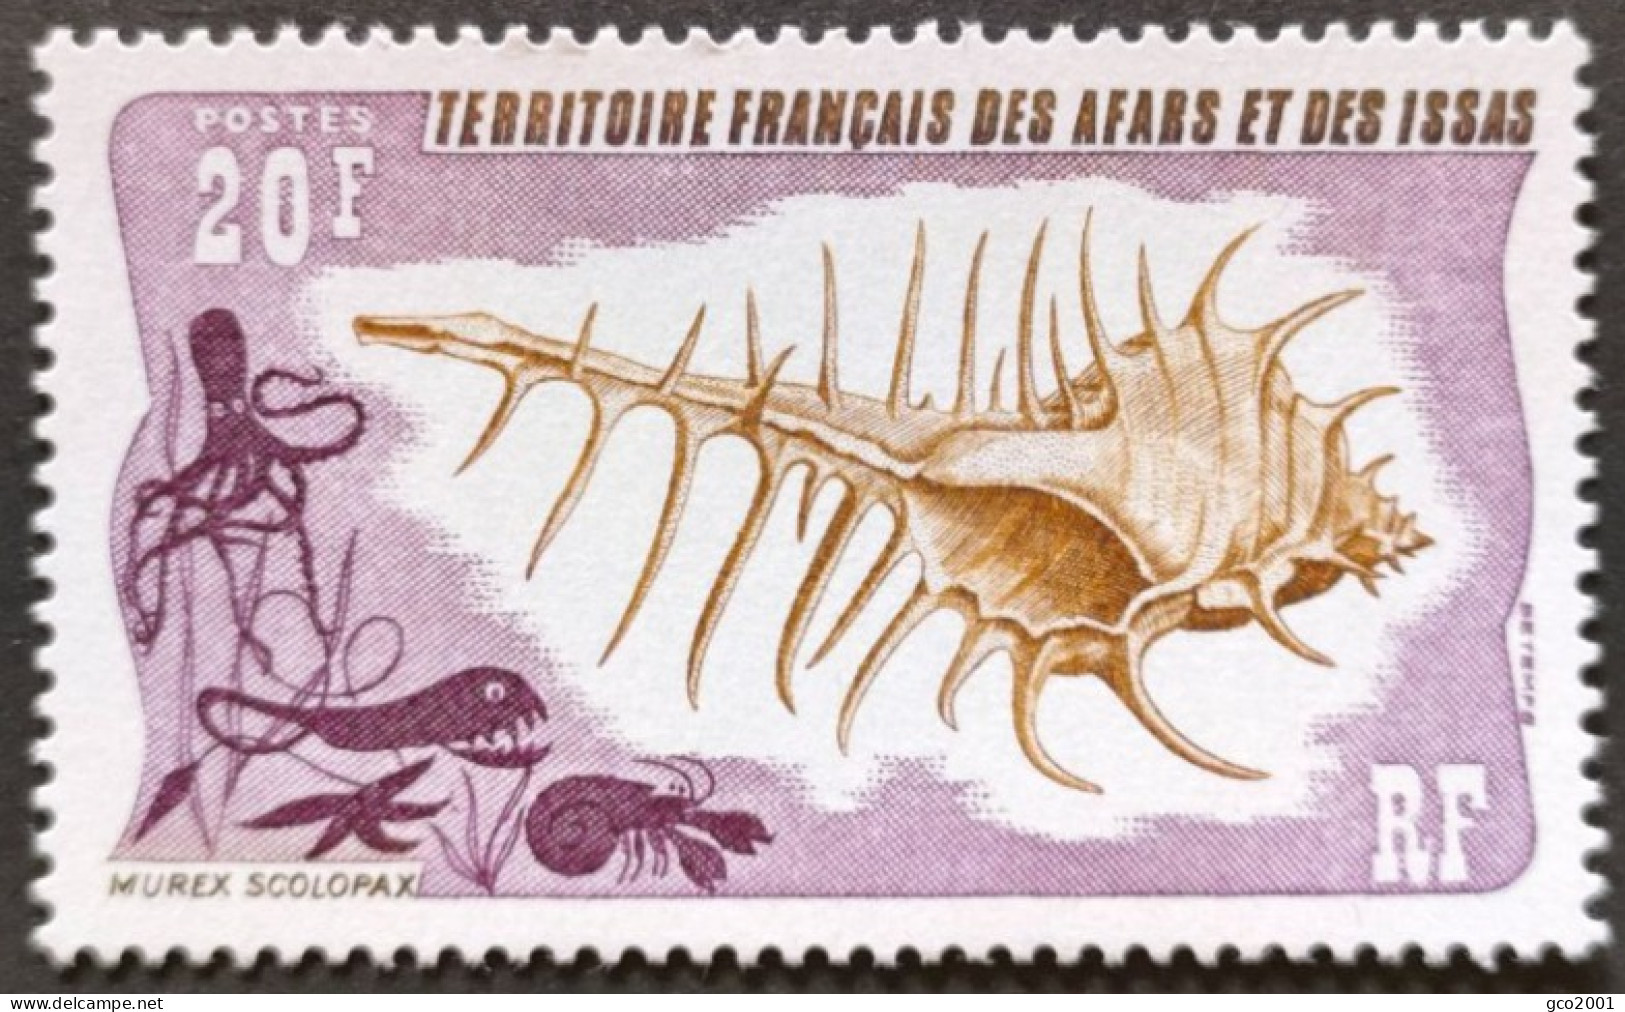 AFARS ET ISSAS / YT 403 / FAUNE - COQUILLAGE - MUREX SCOLOPAX / NEUF ** / MNH - Coquillages